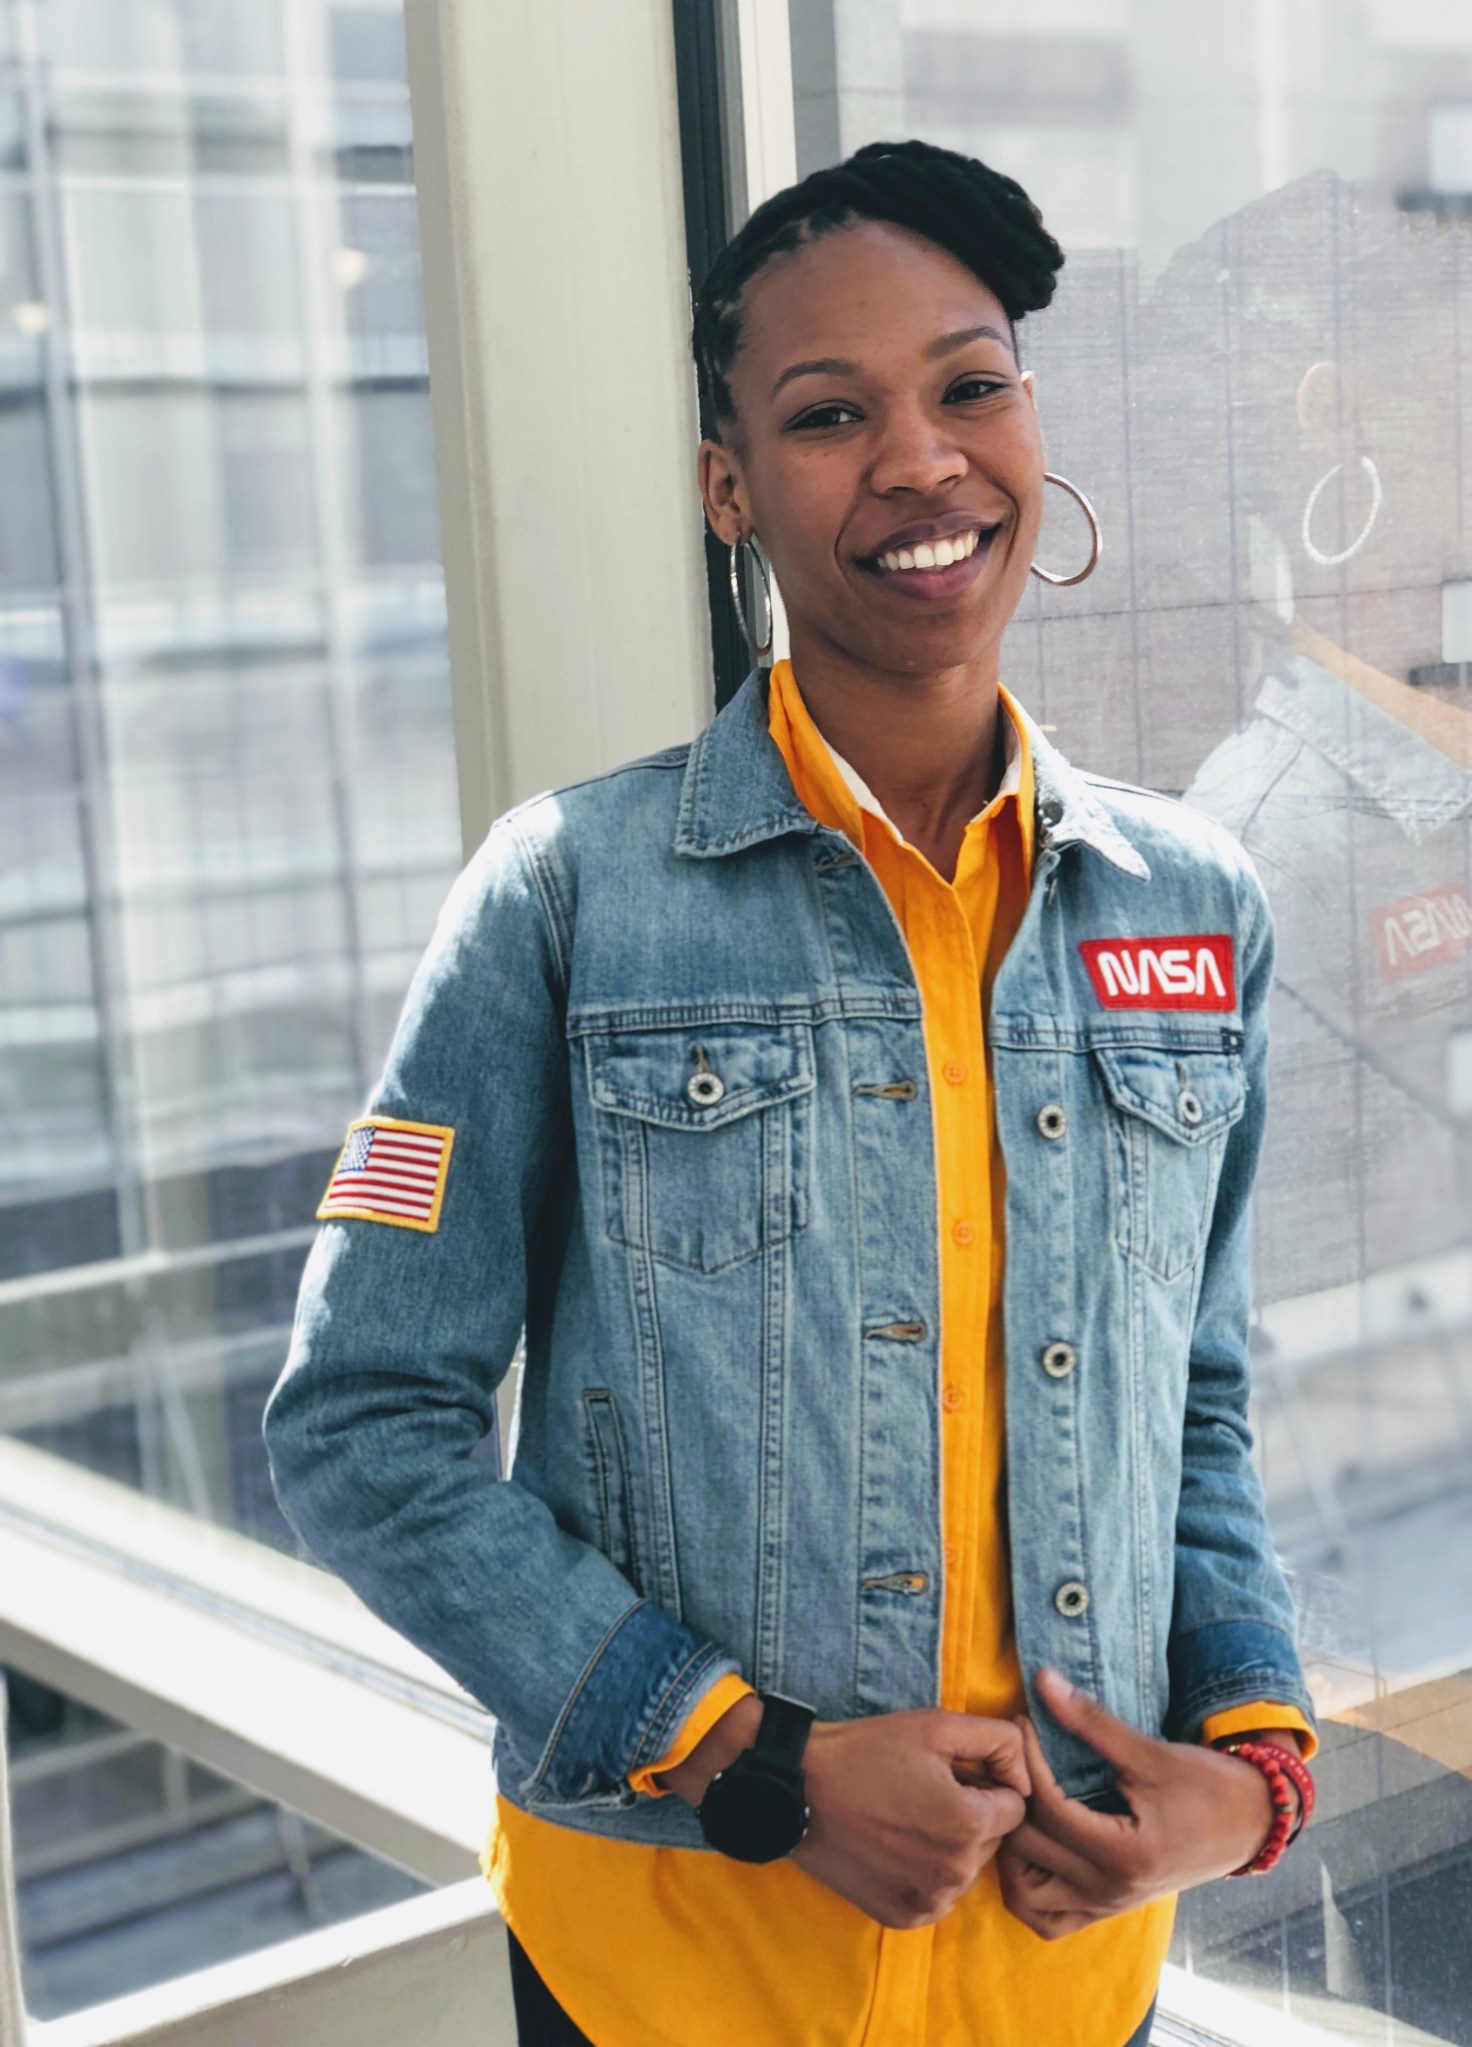 Sabrina Thompson standing in front of a window, smiling, wearing a yellow shirt with a jean jacket with a NASA patch on the right